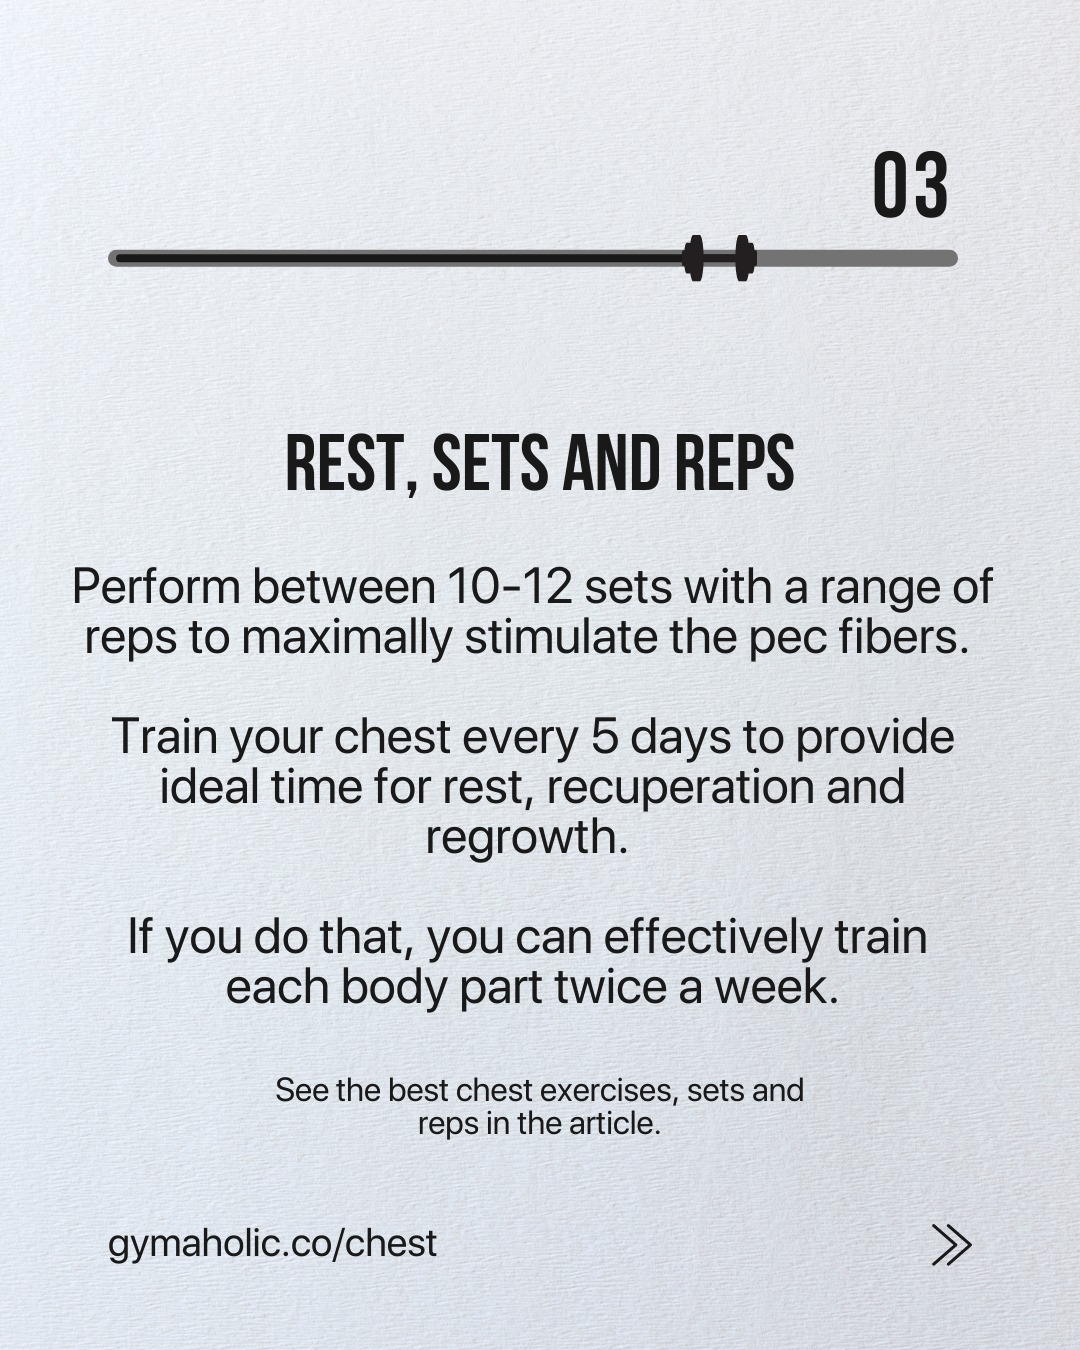 If you’re happy with your conventional chest training gives you, it’s okay to